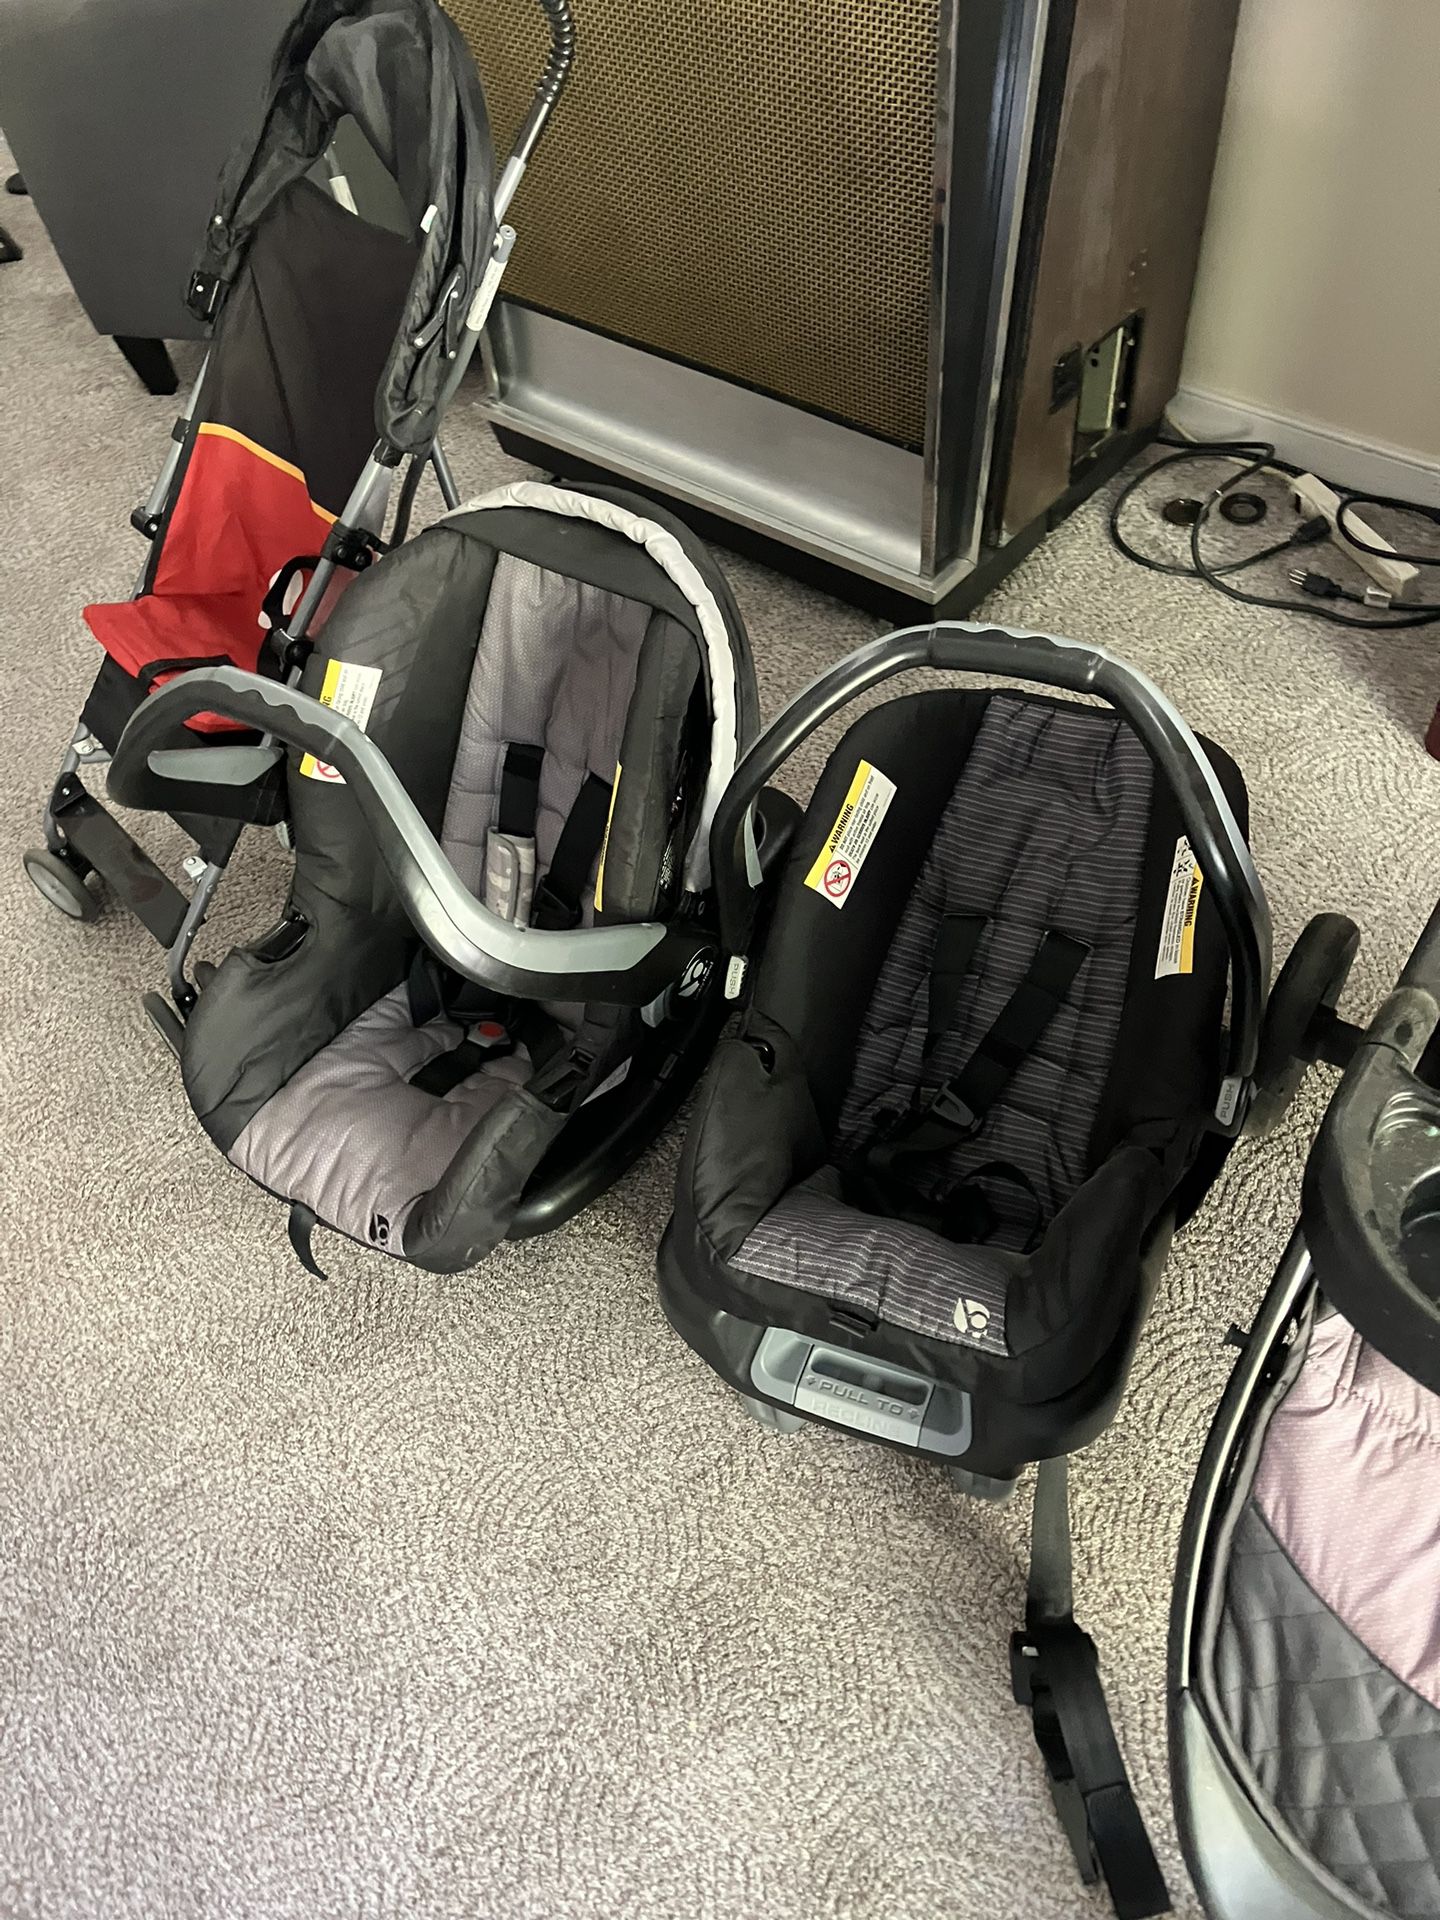 Strollers & Car Seats/ Carriers